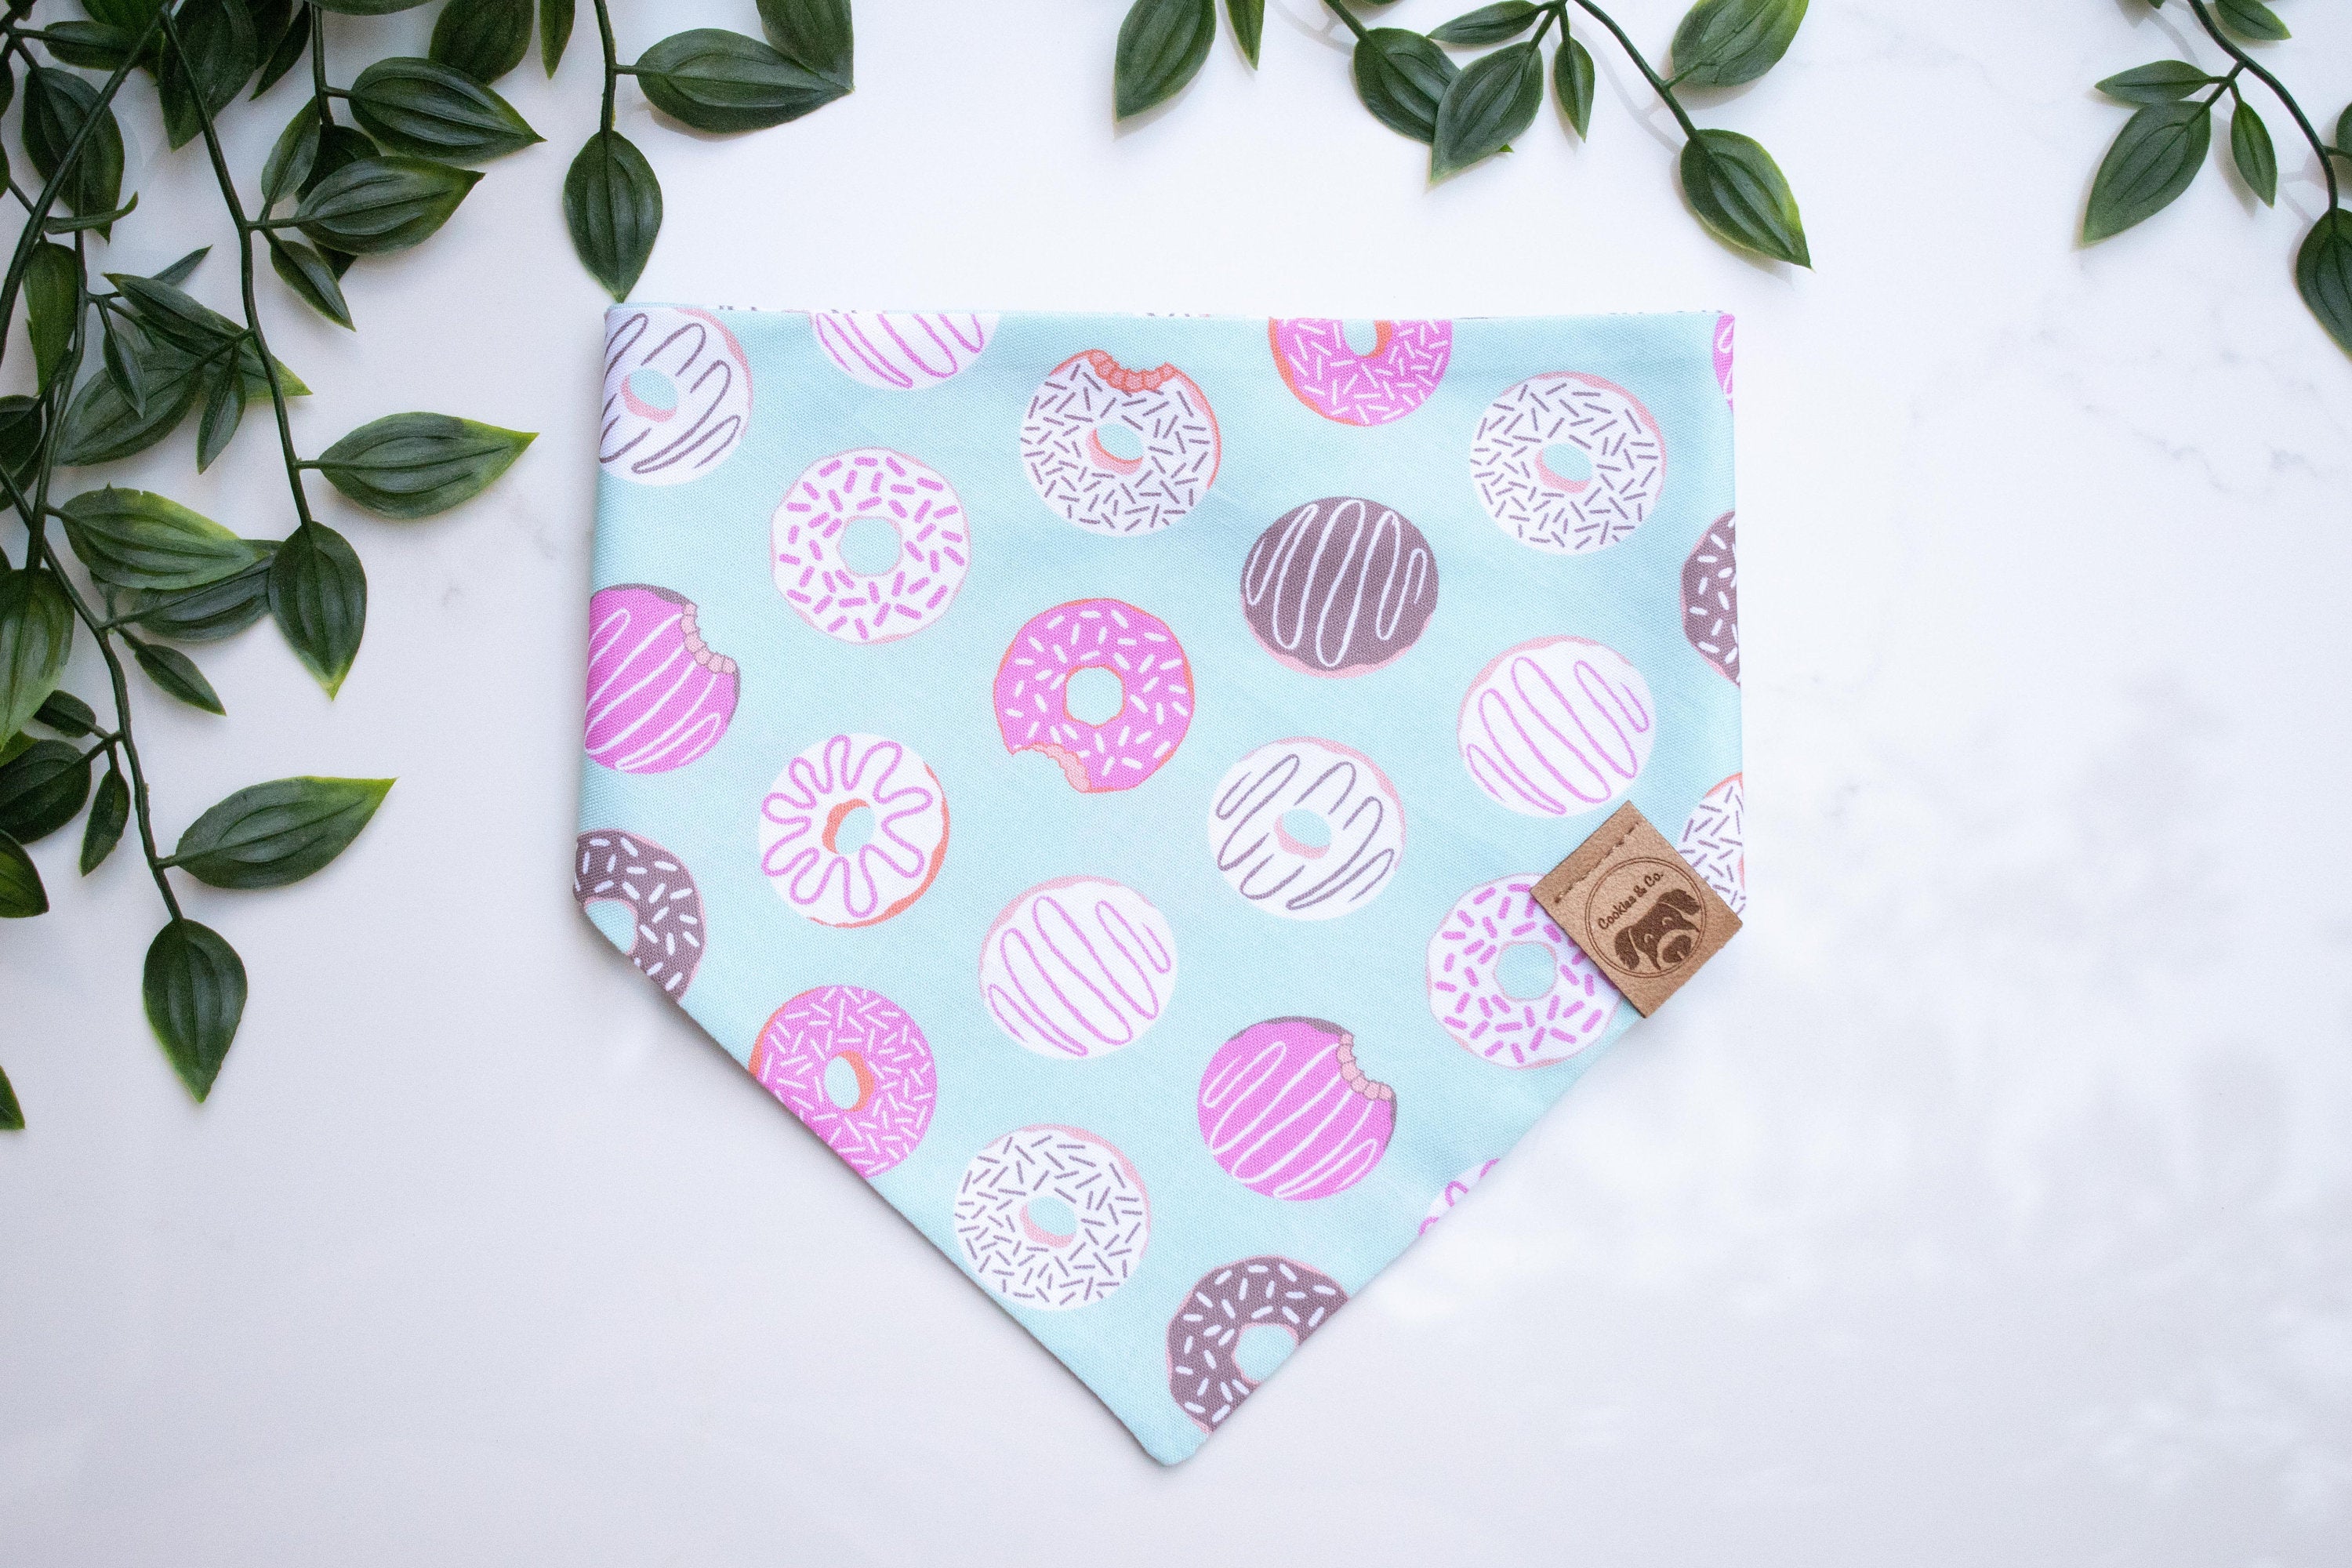 DoMutts bandana print, featuring all sorts of donuts such as jelly filled donuts, chocolate glazed donuts with white sprinkles, arranged row by row diagonally, on a light blue fabric